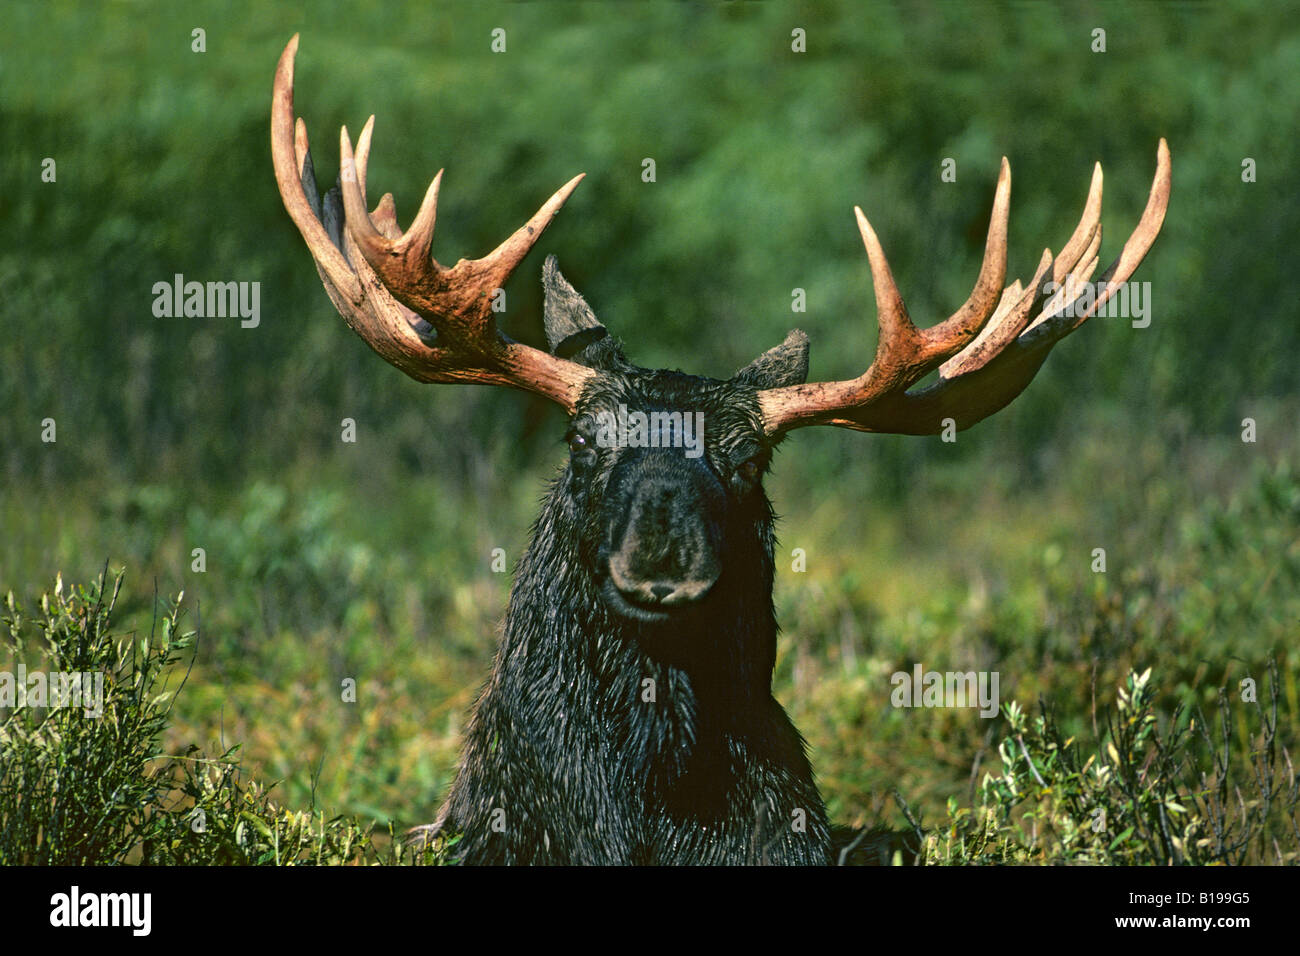 Bull moose (Alces alces) in which the velvet has recently been shed from its antlers and left them stained with blood, Teton Nat Stock Photo